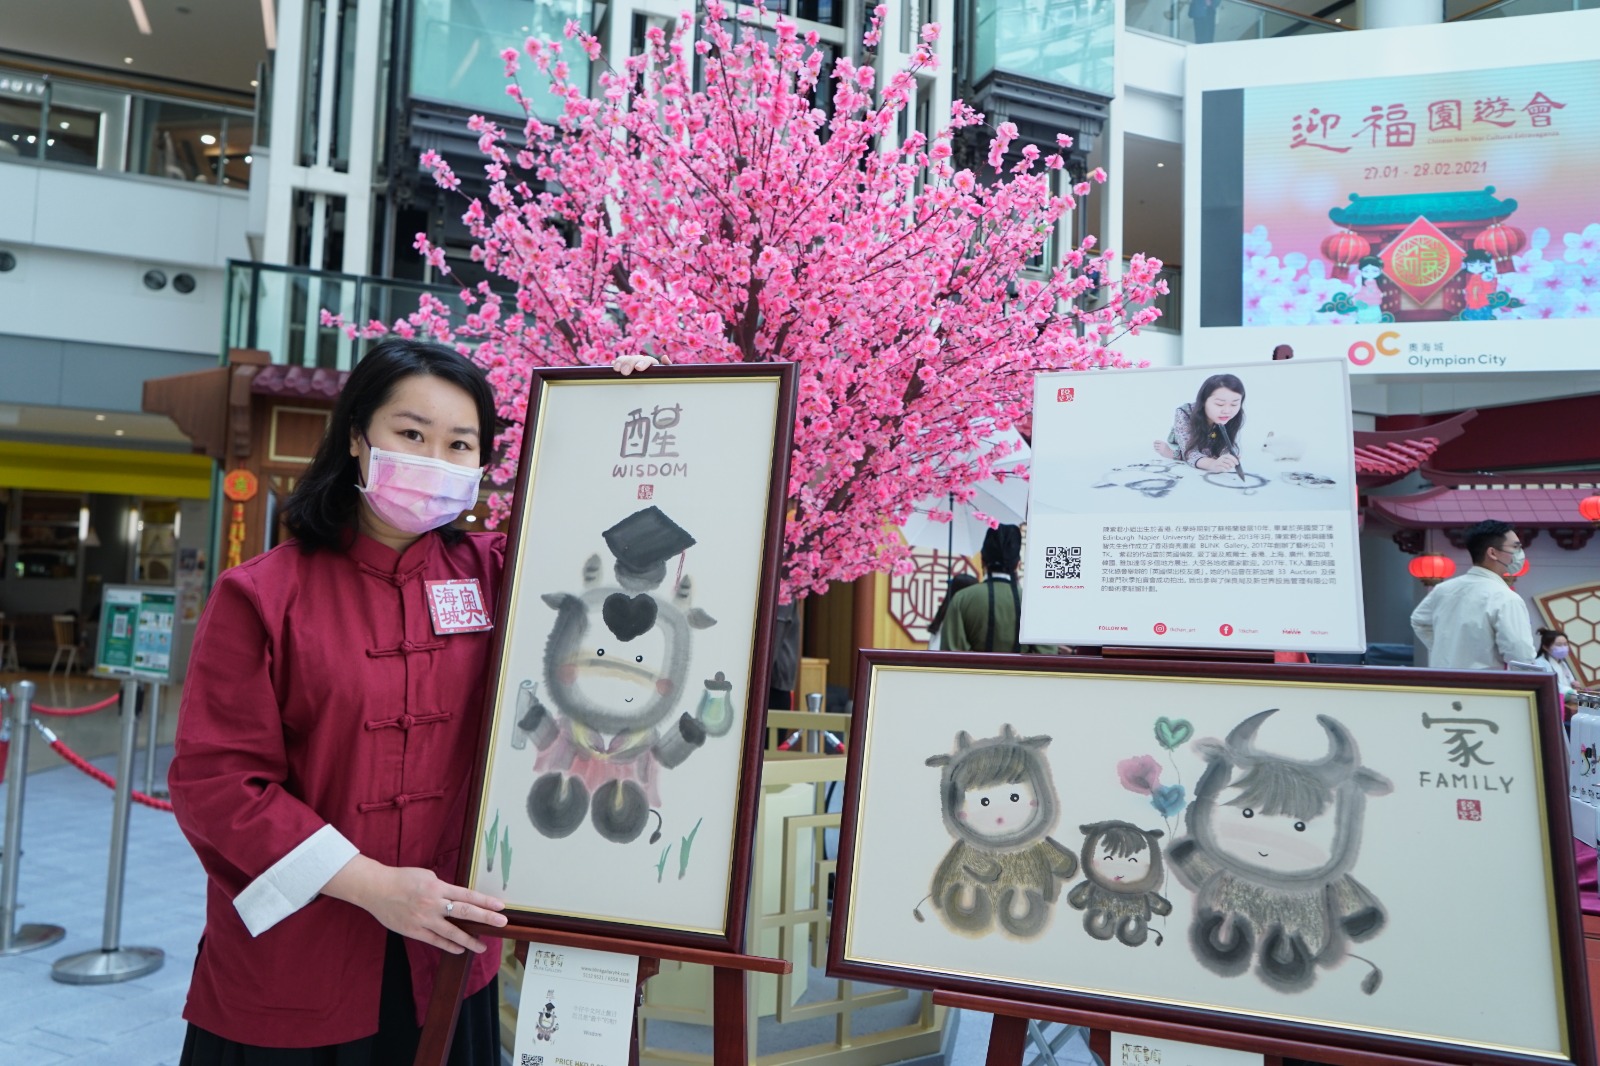 TK Chan standing in front of her artwork 